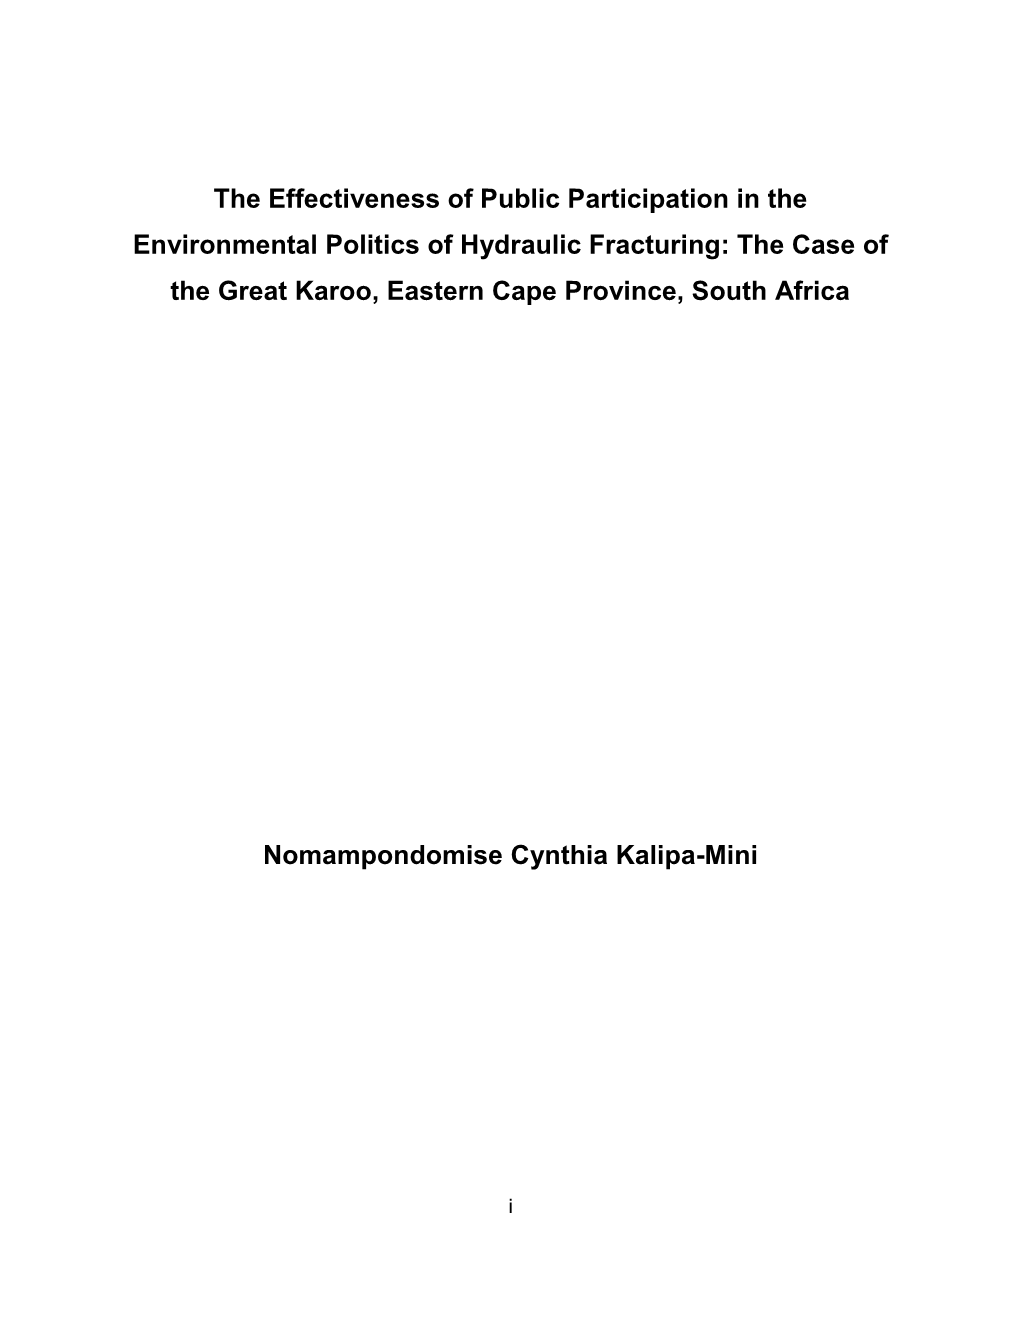 The Effectiveness of Public Participation in the Environmental Politics of Hydraulic Fracturing: the Case of the Great Karoo, Eastern Cape Province, South Africa